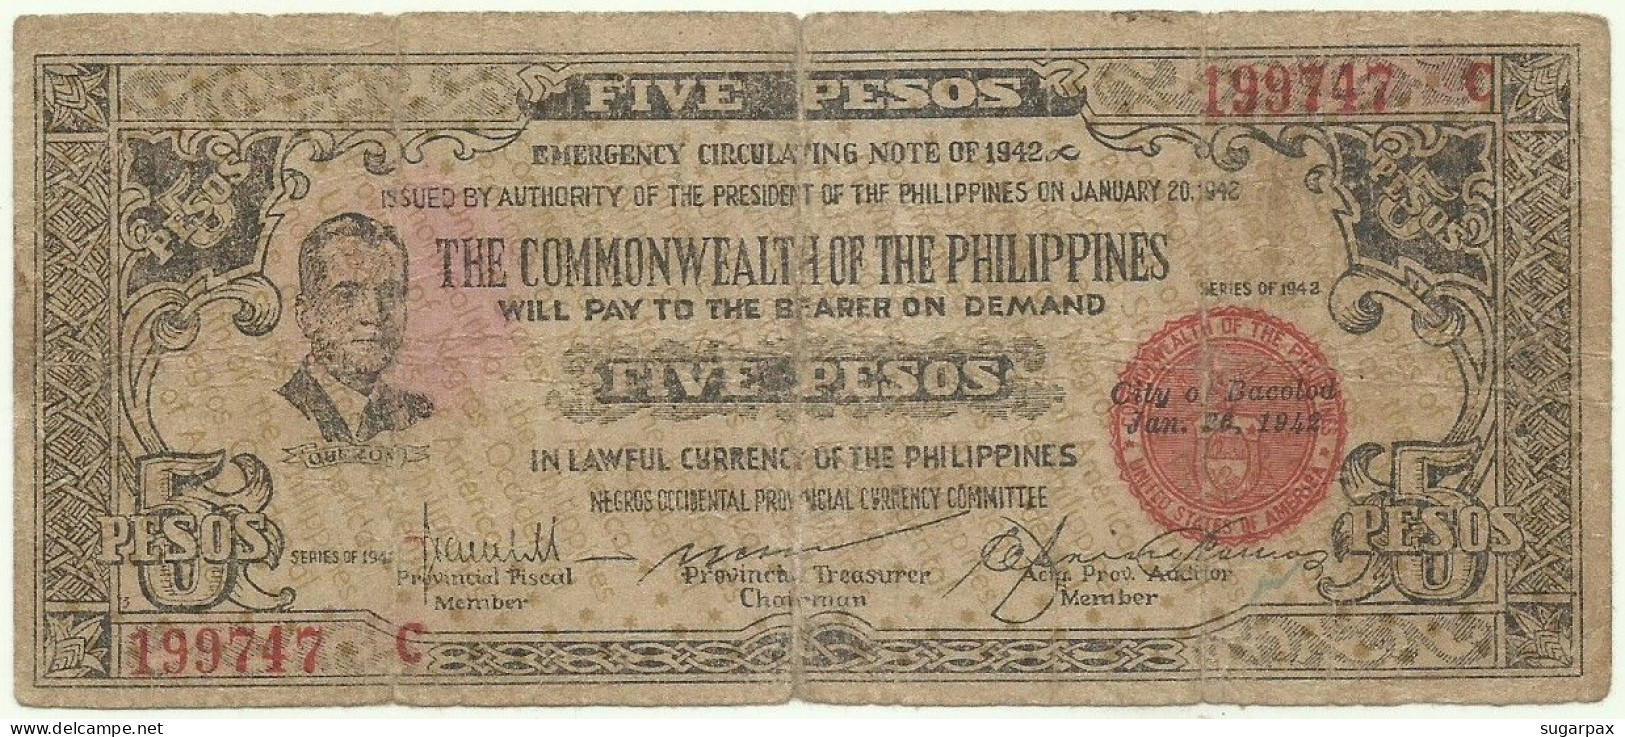 PHILIPPINES - 5 Pesos - 1942 - Pick S 648.a - Serie C - NEGROS Occidental Provincial Currency Committee - Filipinas